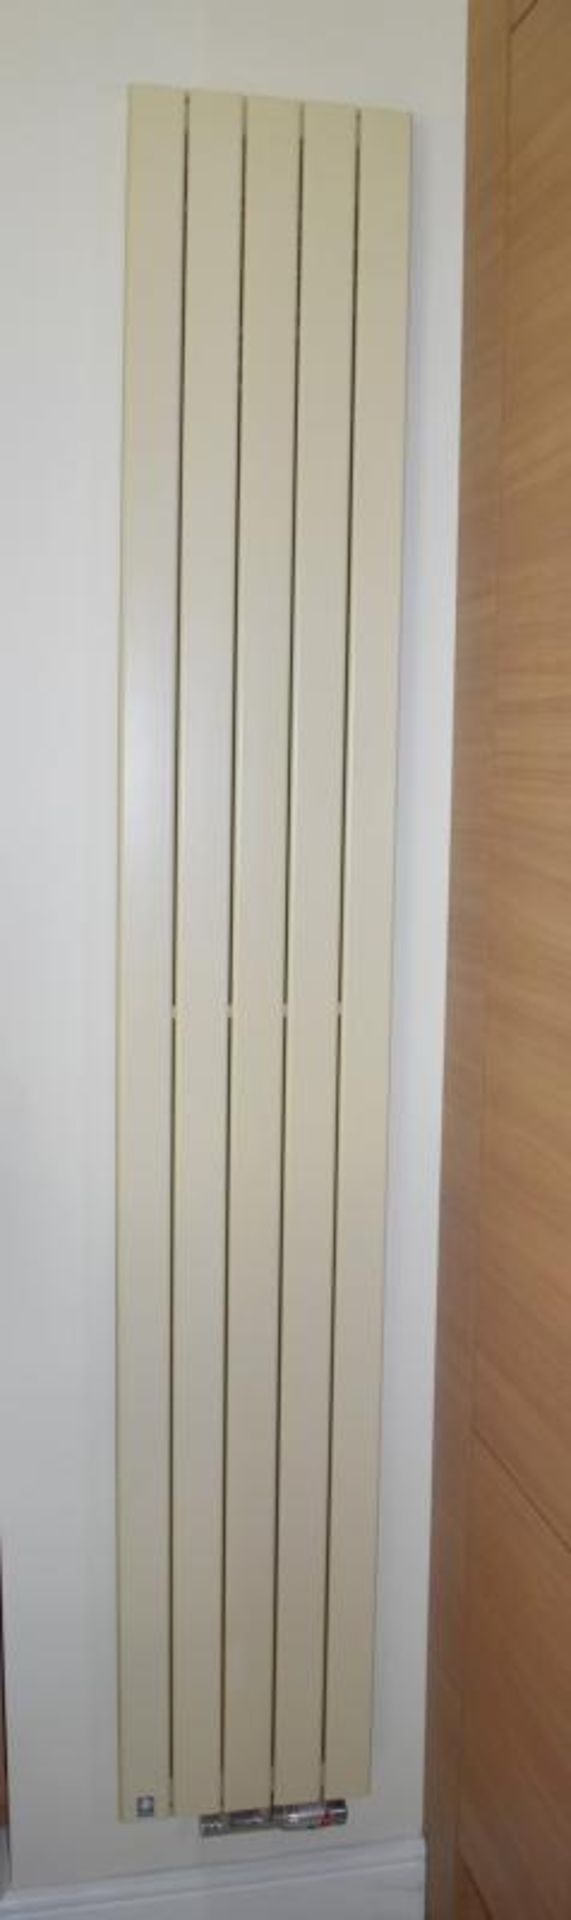 1 x Jaga Vertical Wall Panel Radiator With Vale - Cream Finish Suitable For All Interiors - H200 x W